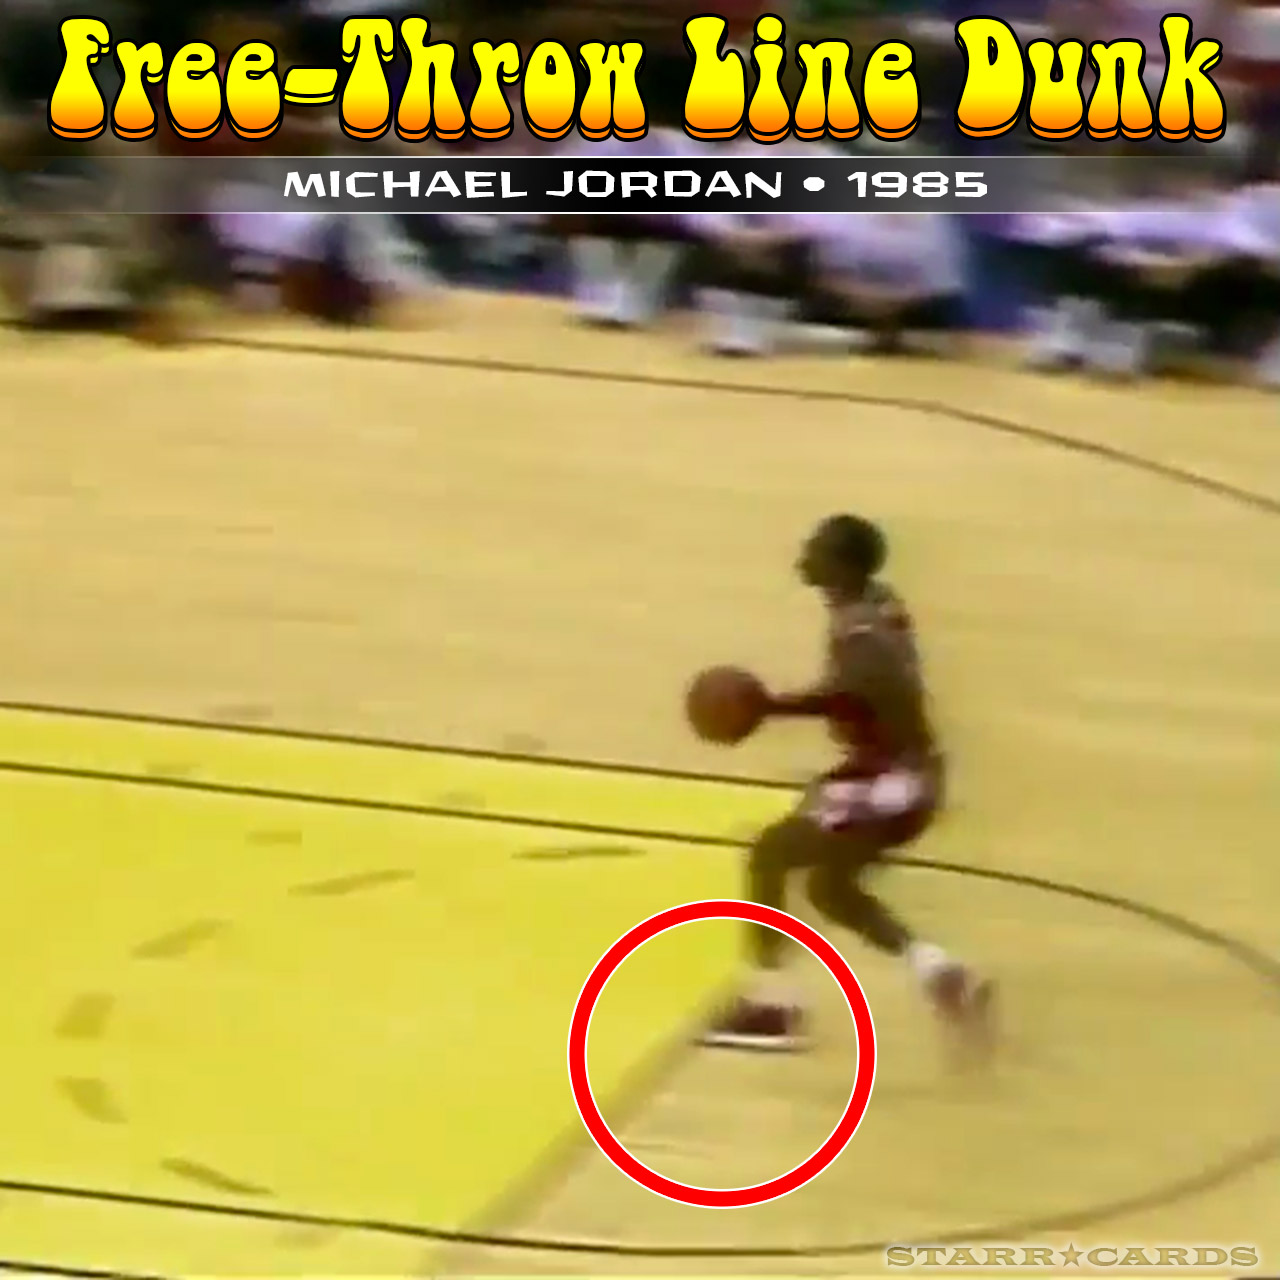 Free-throw line dunks with Dr. J, Michael Jordan, Zach LaVine and more